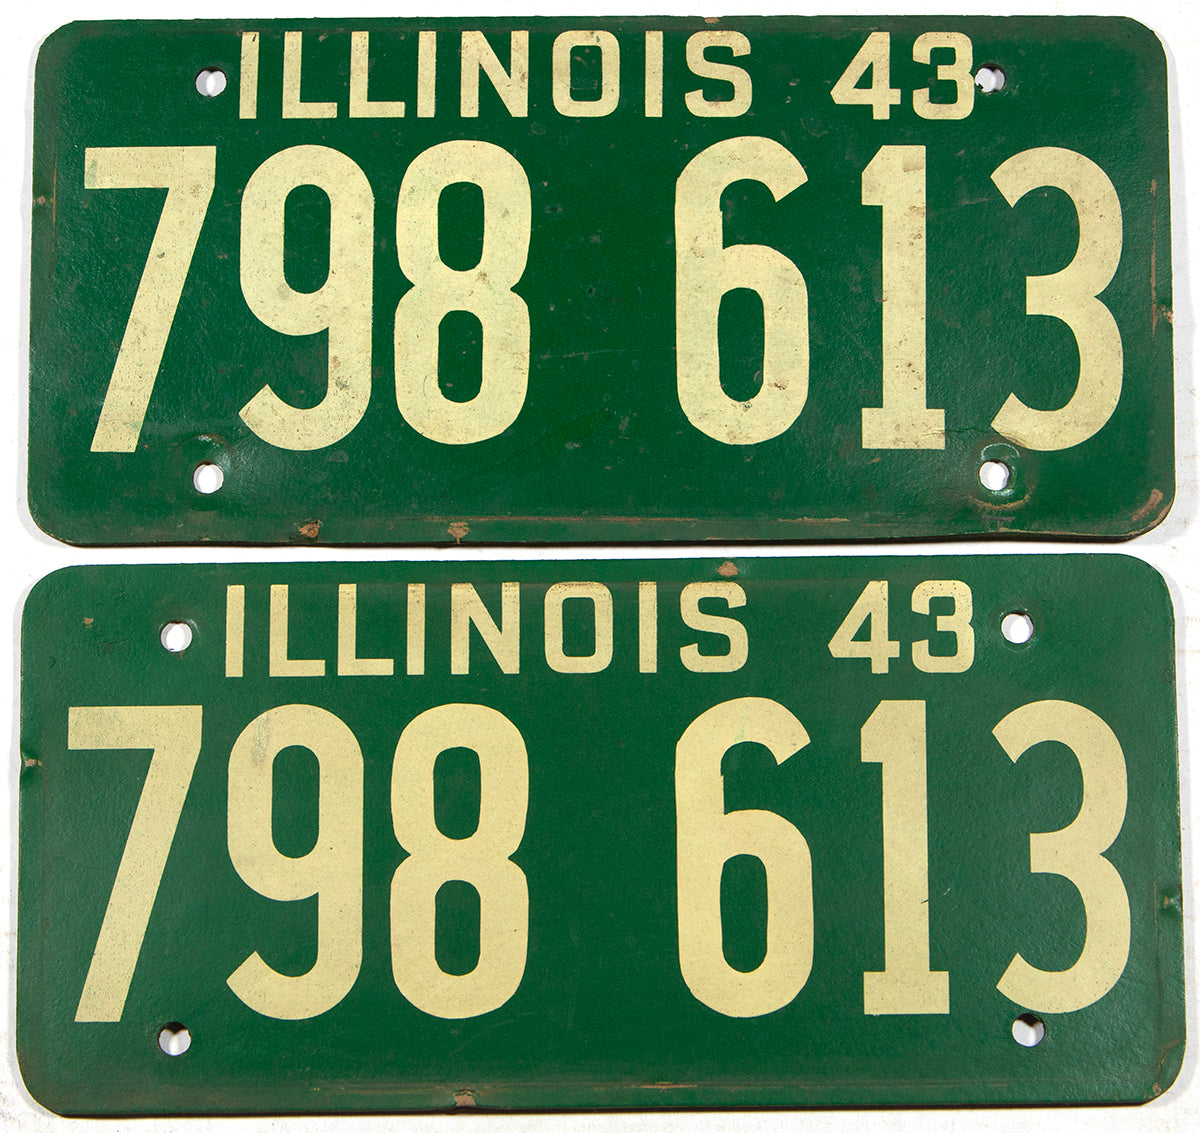 An antique World War II pair of 1943 Illinois car license plate in very good condition